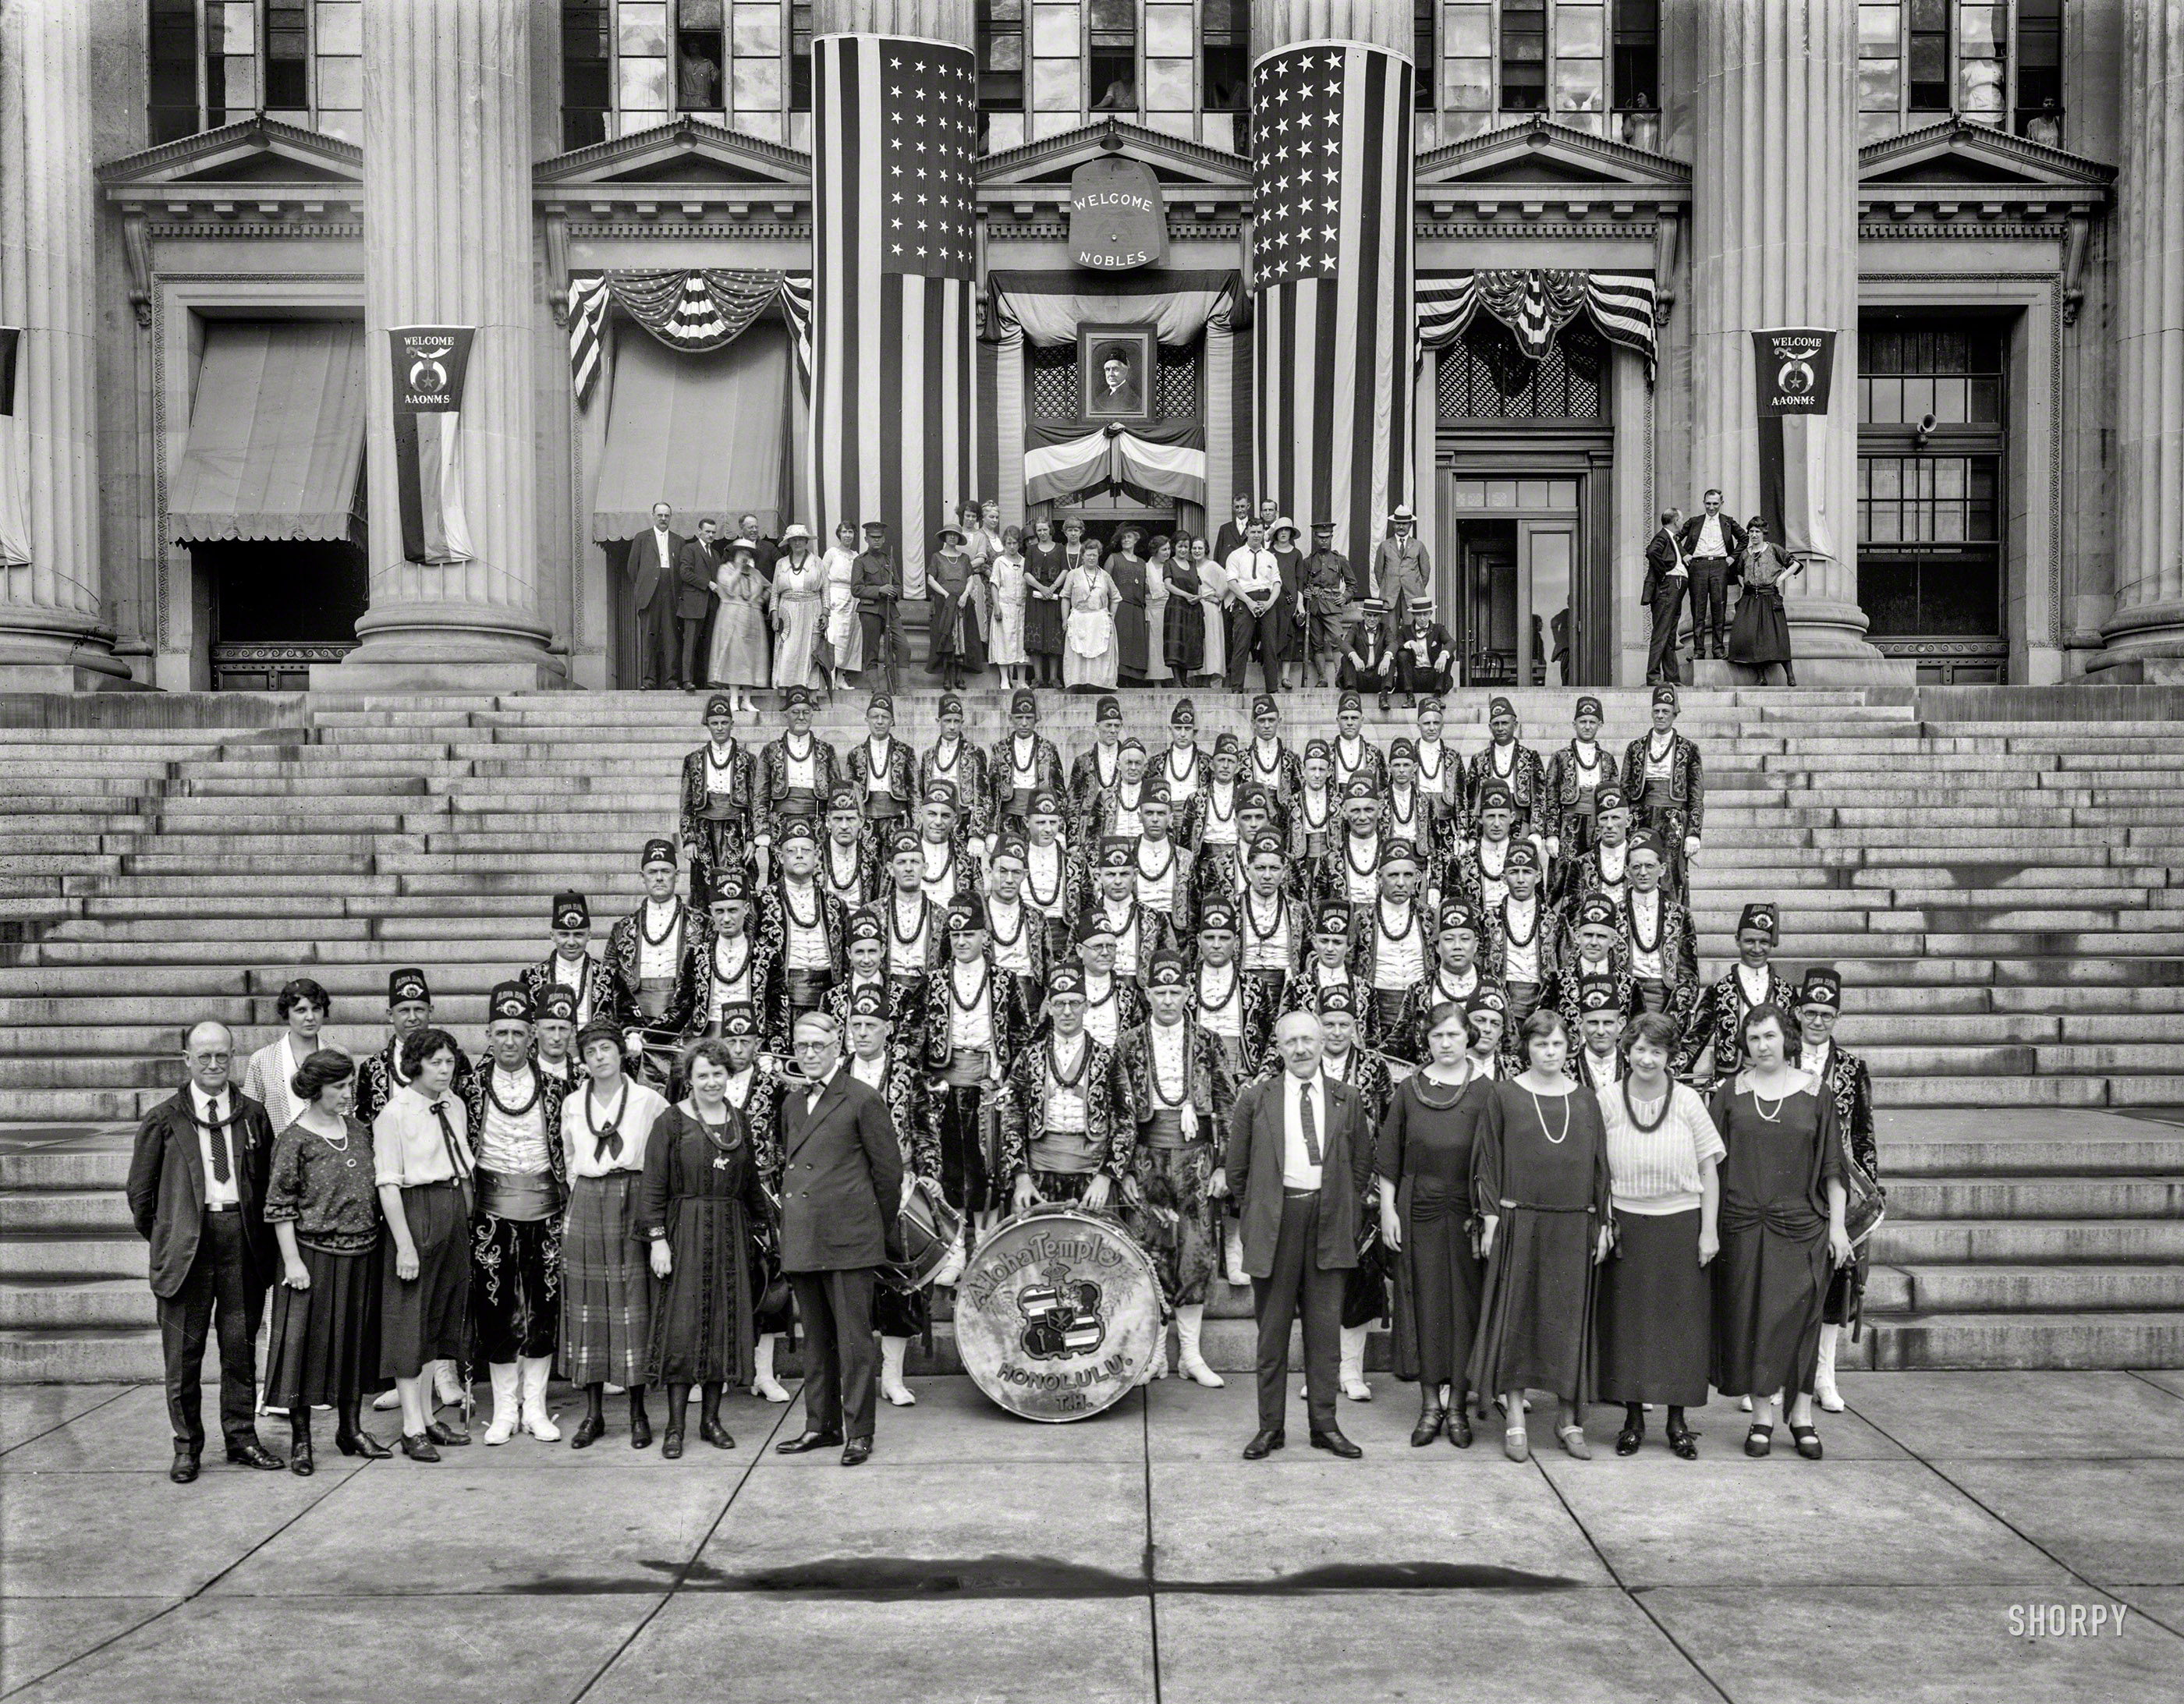 June 1923. Washington, D.C. "Aloha Band at Bureau of Engraving and Printing." Welcoming the Ancient Arabic Order of the Nobles of the Mystic Shrine (AAONMS) during the Shriners convention, with a portrait of President Warren Harding, noted Mason (who would be dead by August), over the entrance. National Photo Company Collection glass negative. View full size.